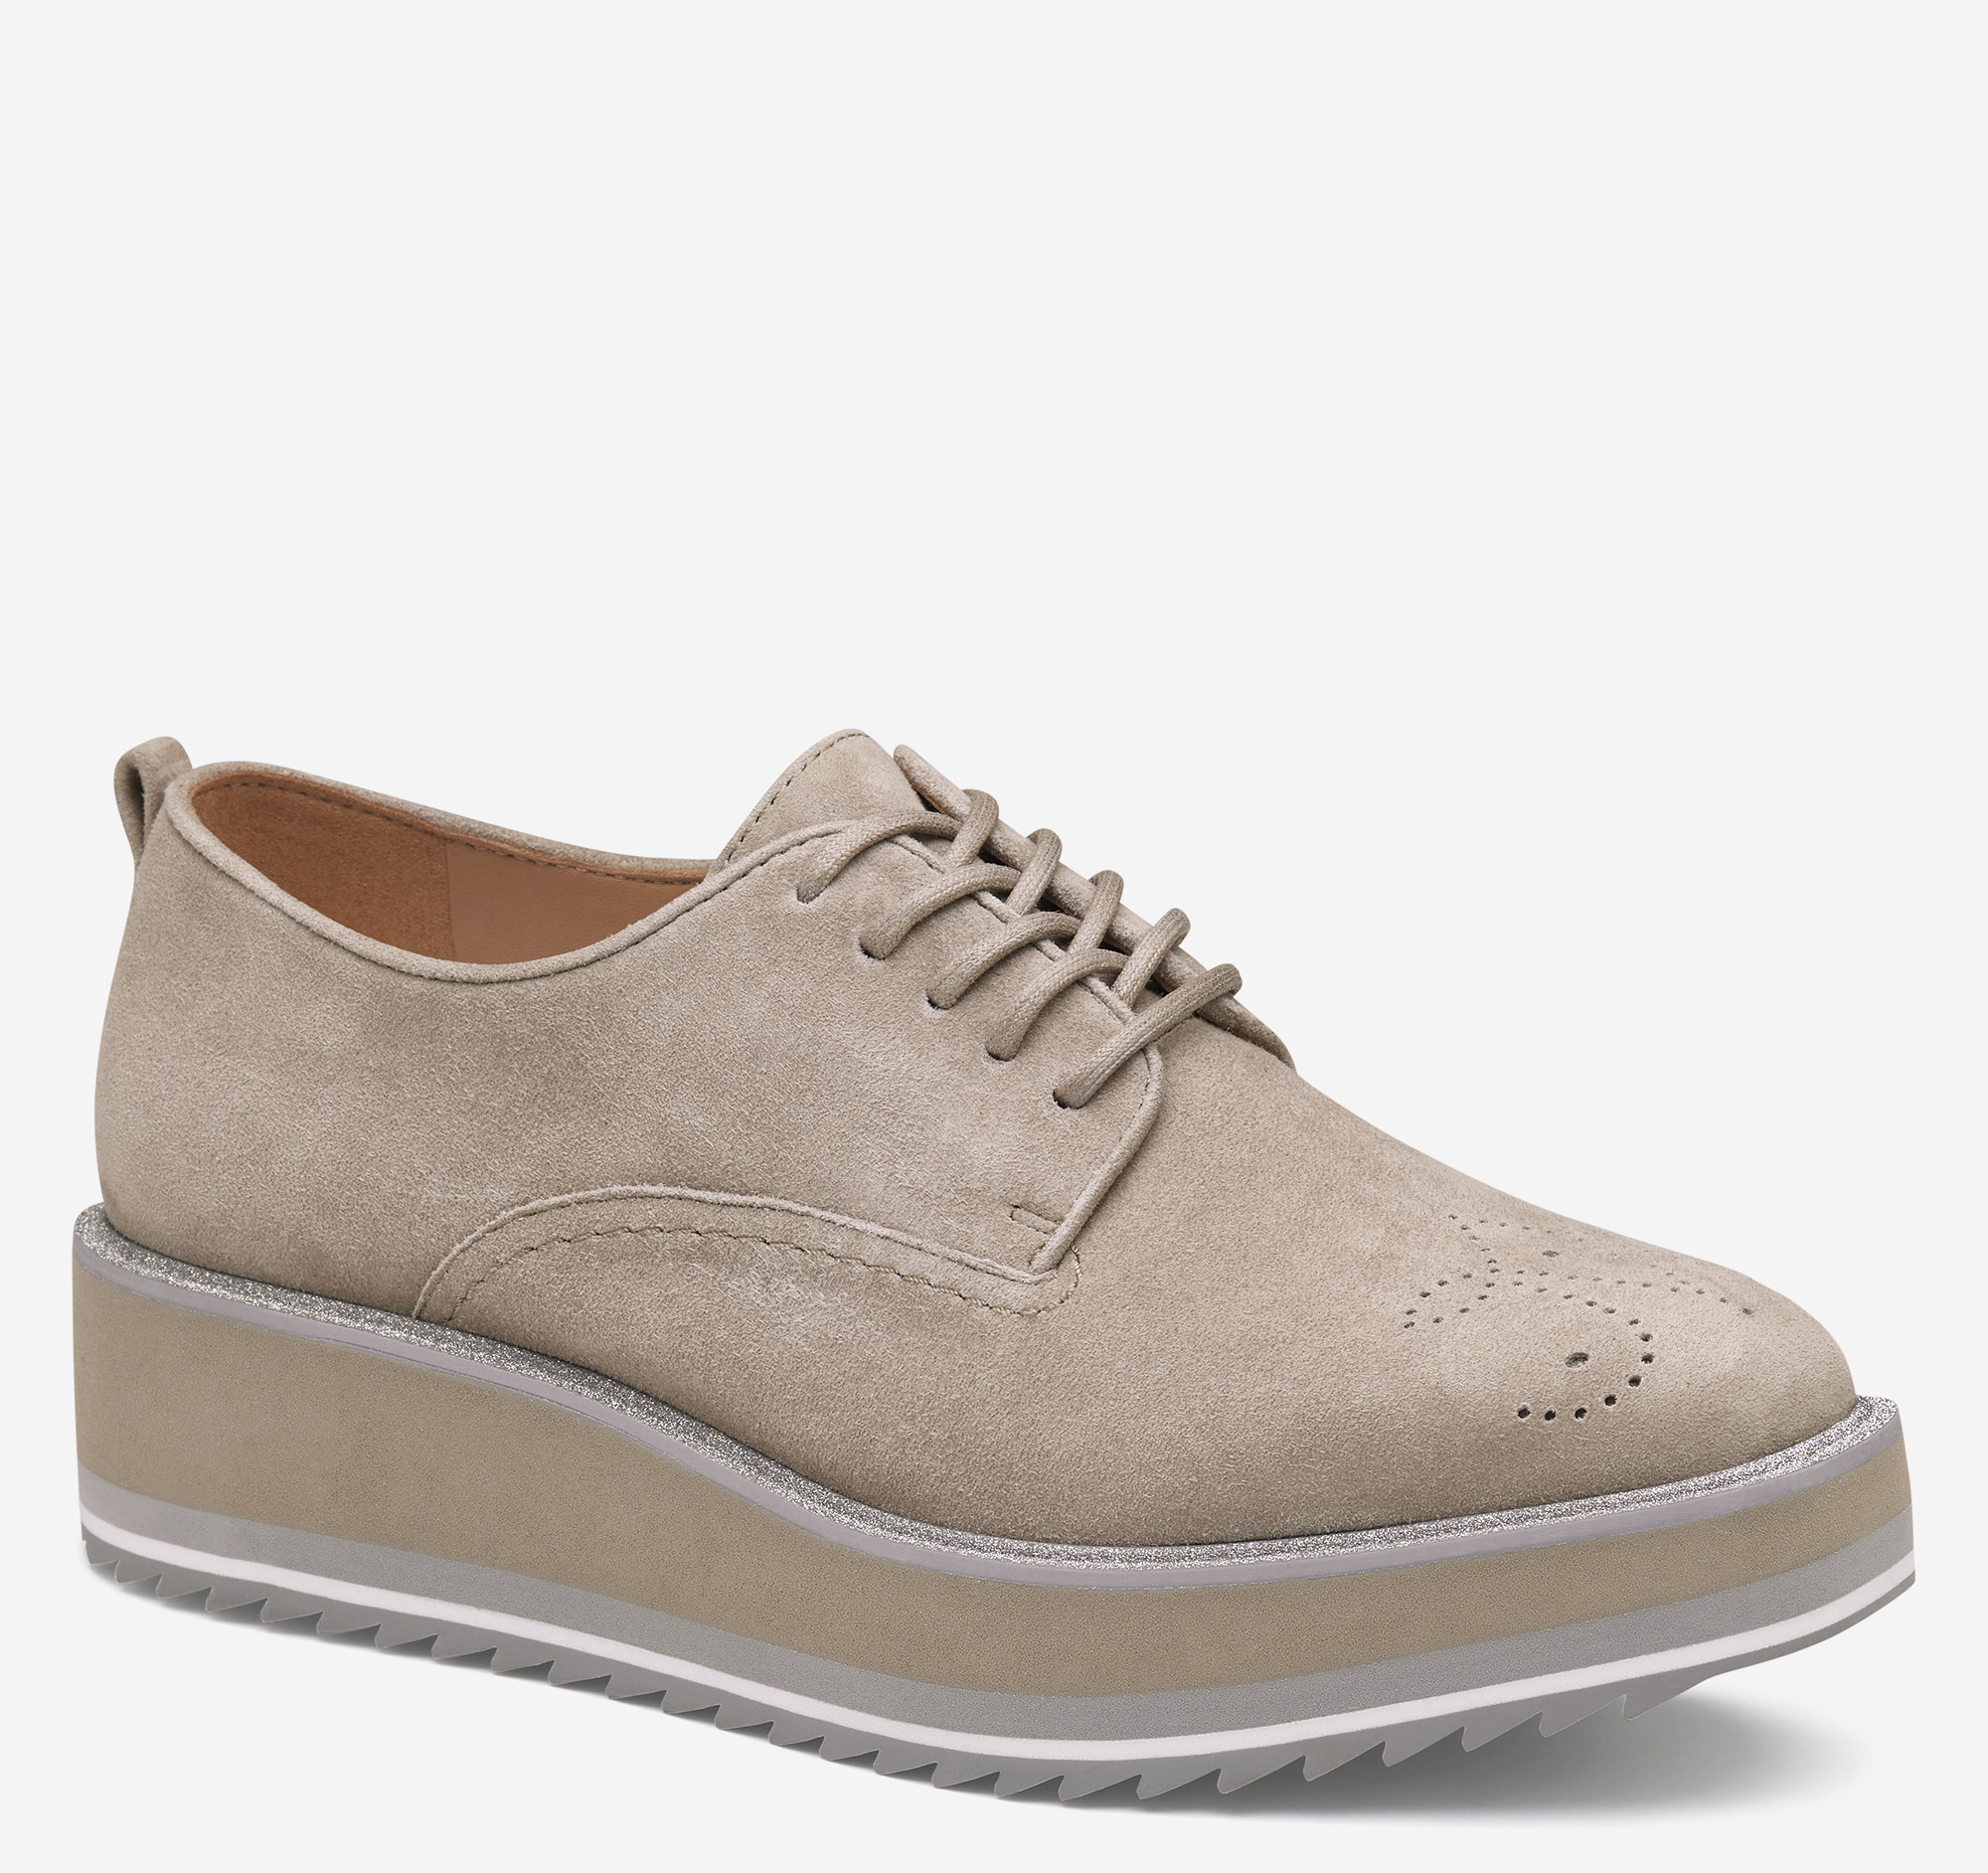 Gracelyn Brogue Oxford image number null